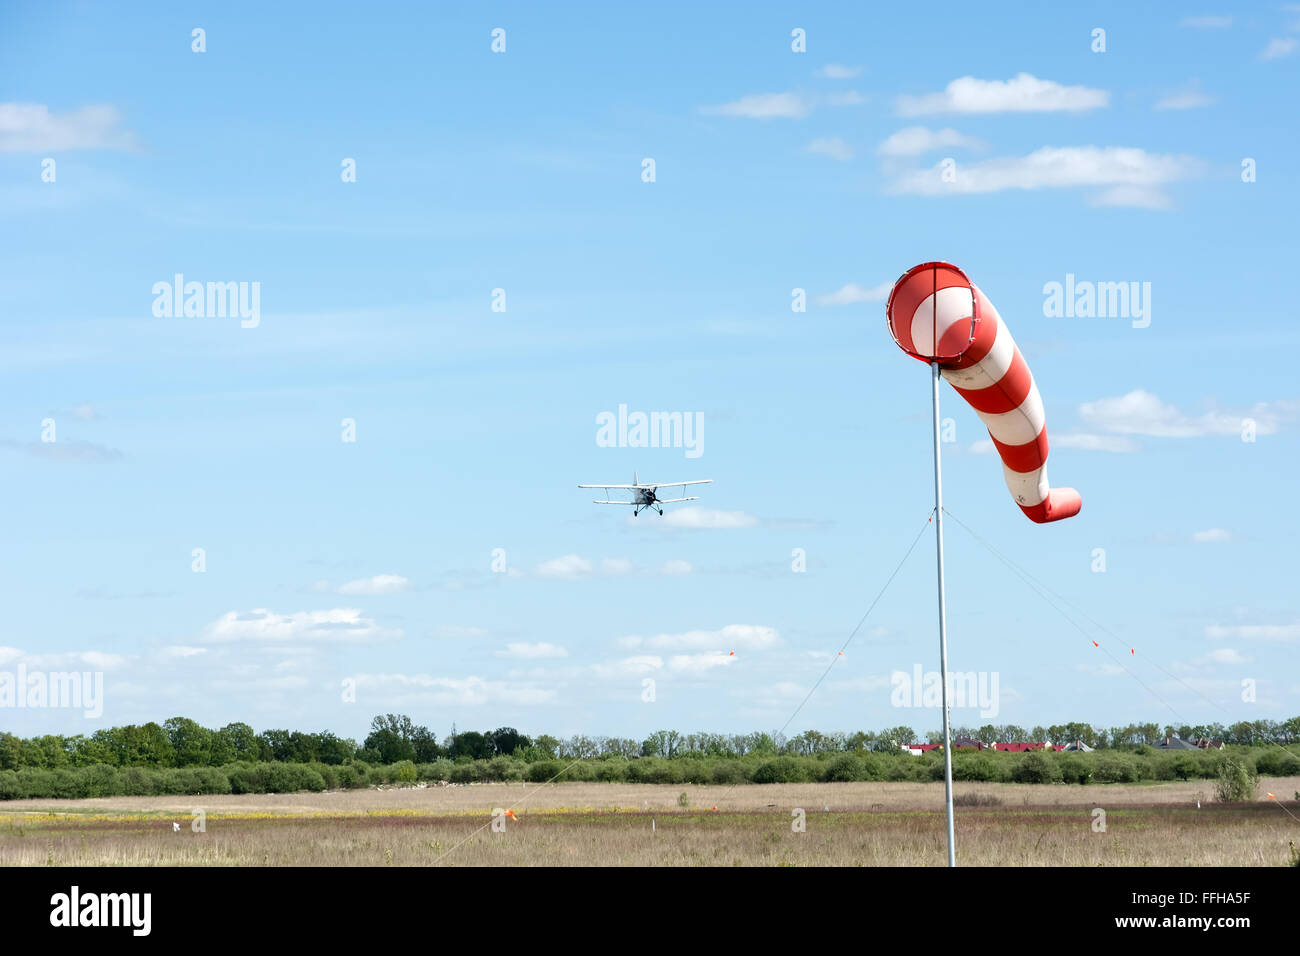 Windsock and going to land the plane on a background of blue sky. Stock Photo